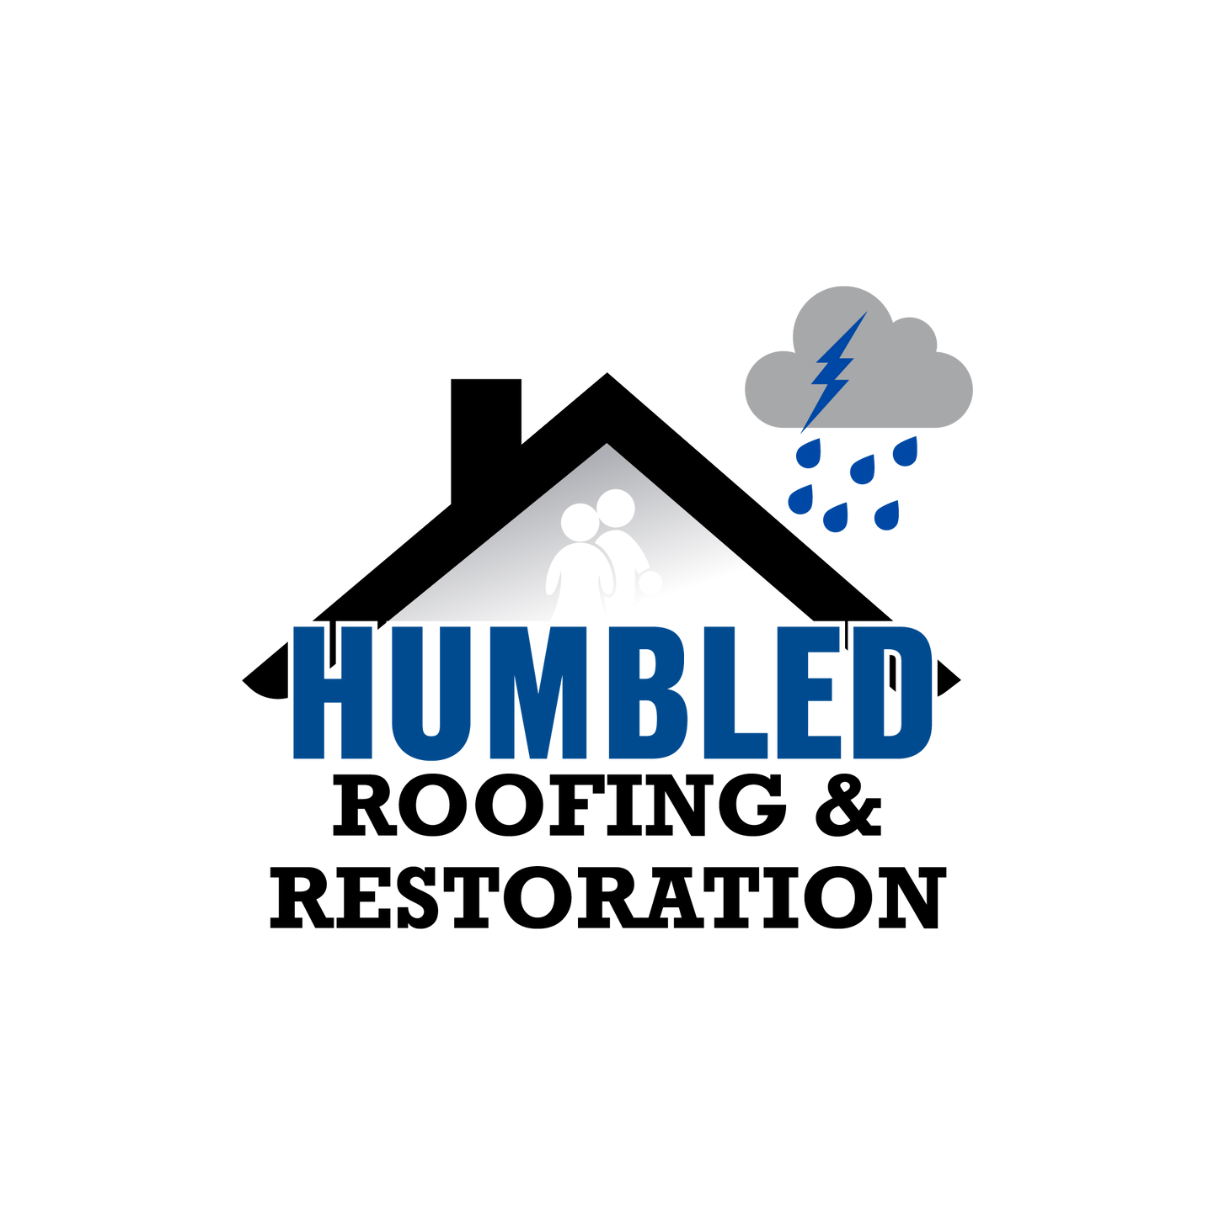 Humbled Roofing & Restoration